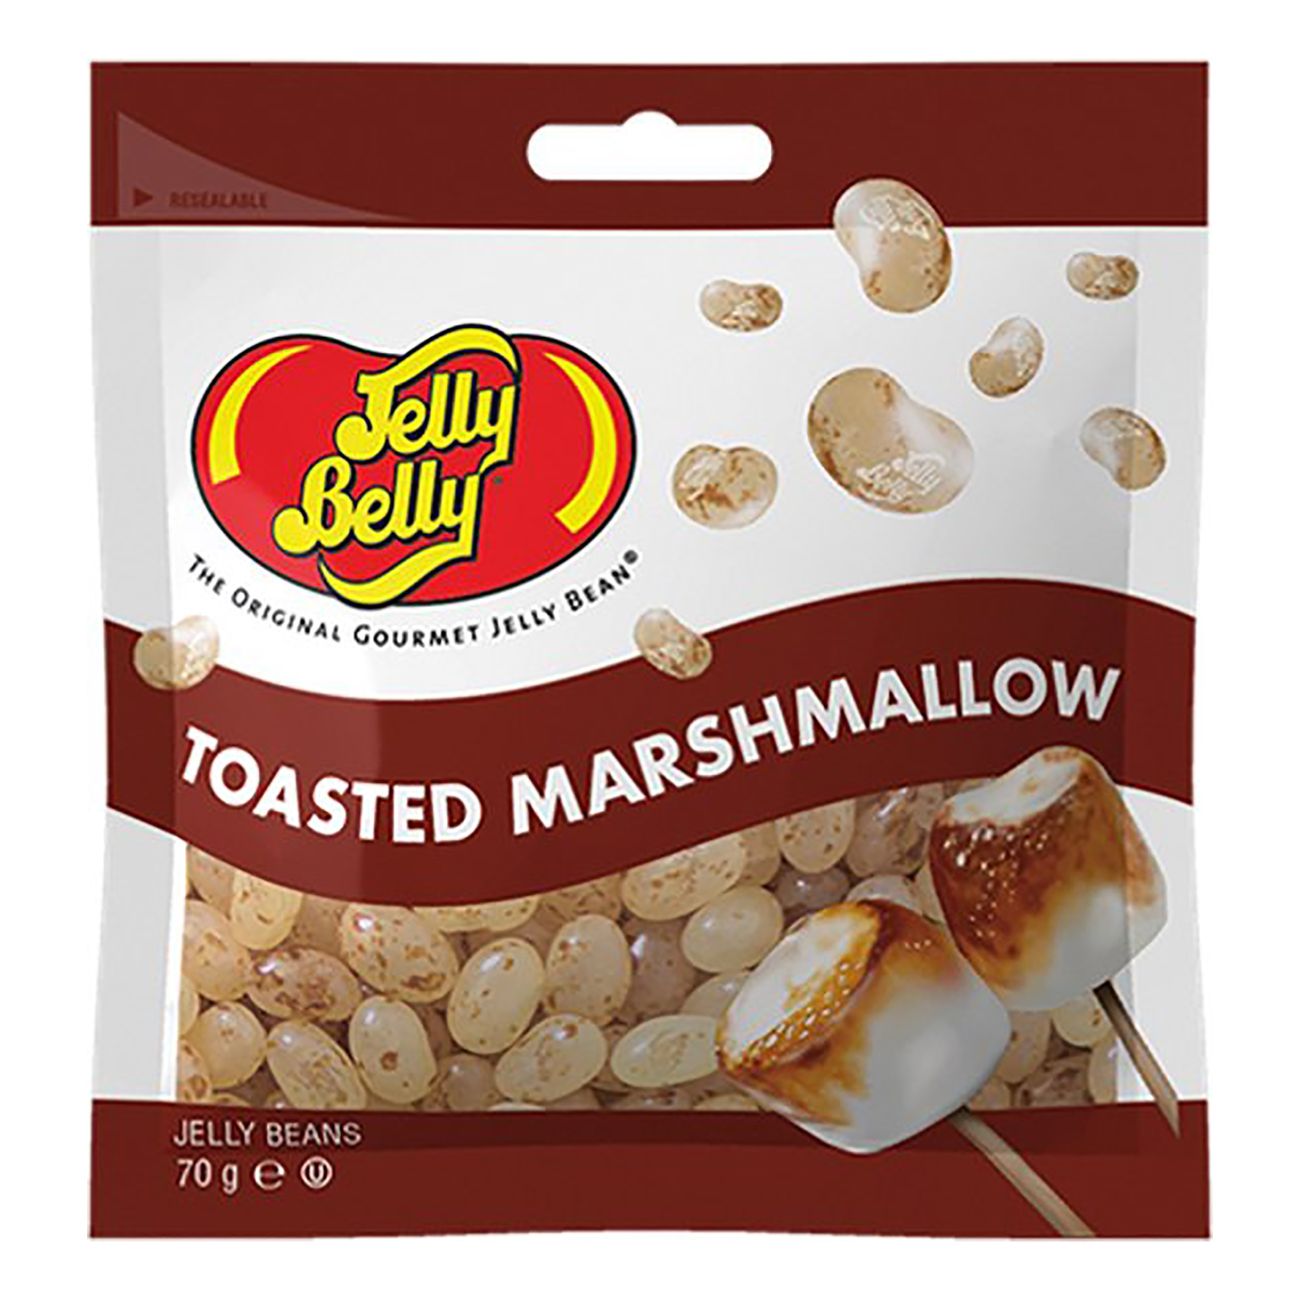 jelly-belly-toasted-marshmallow-94476-1